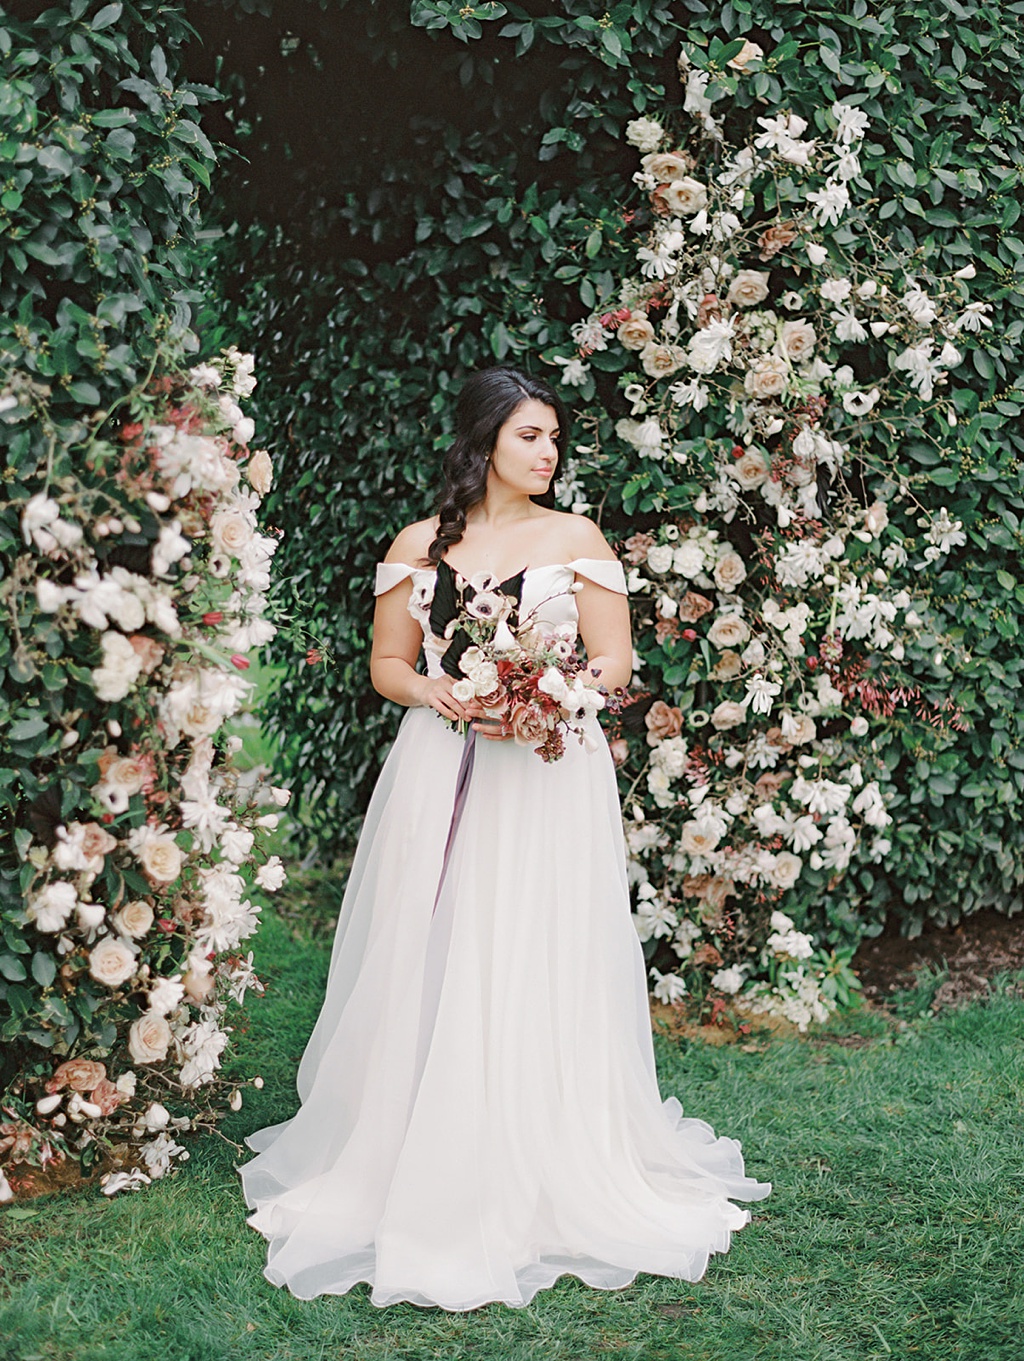 A bride holding a bouquet stands in front of a manicured hedge "doorway" to the vineyard at Chateau Lill